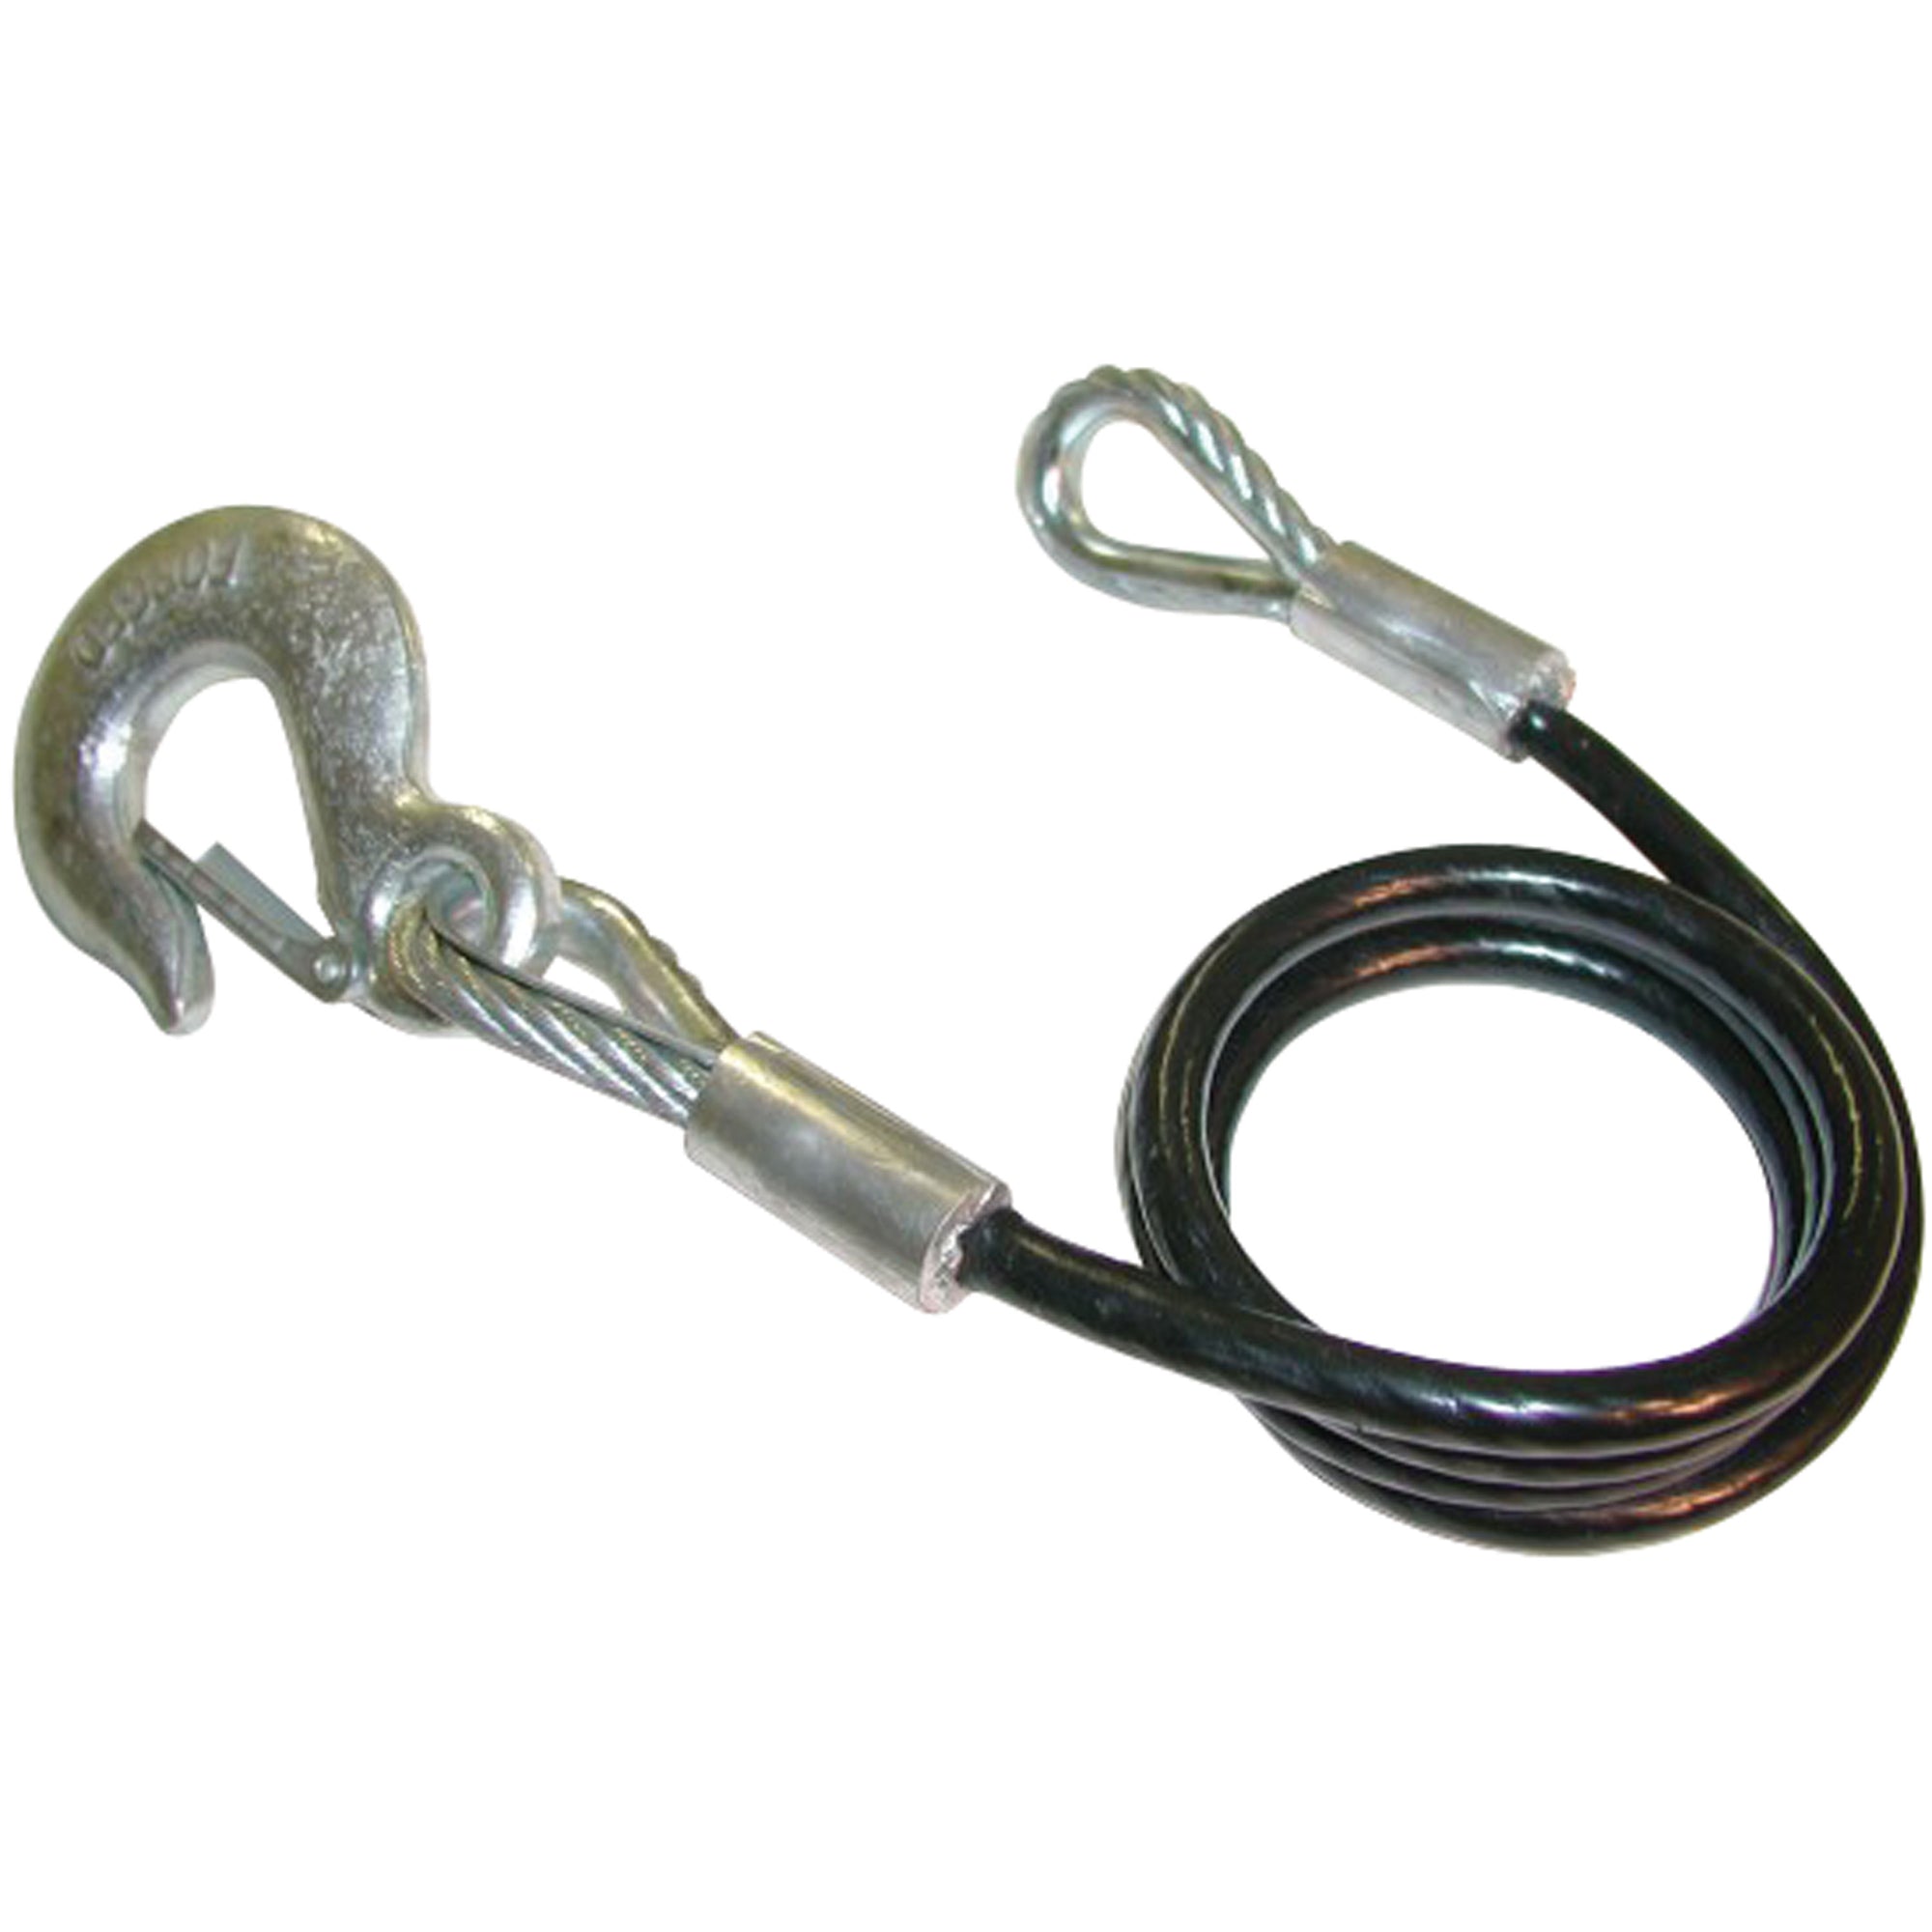 C.R. Brophy SC34 Trailer Safety Cable with Eye Hook - 5/16" - 3/8" Cable